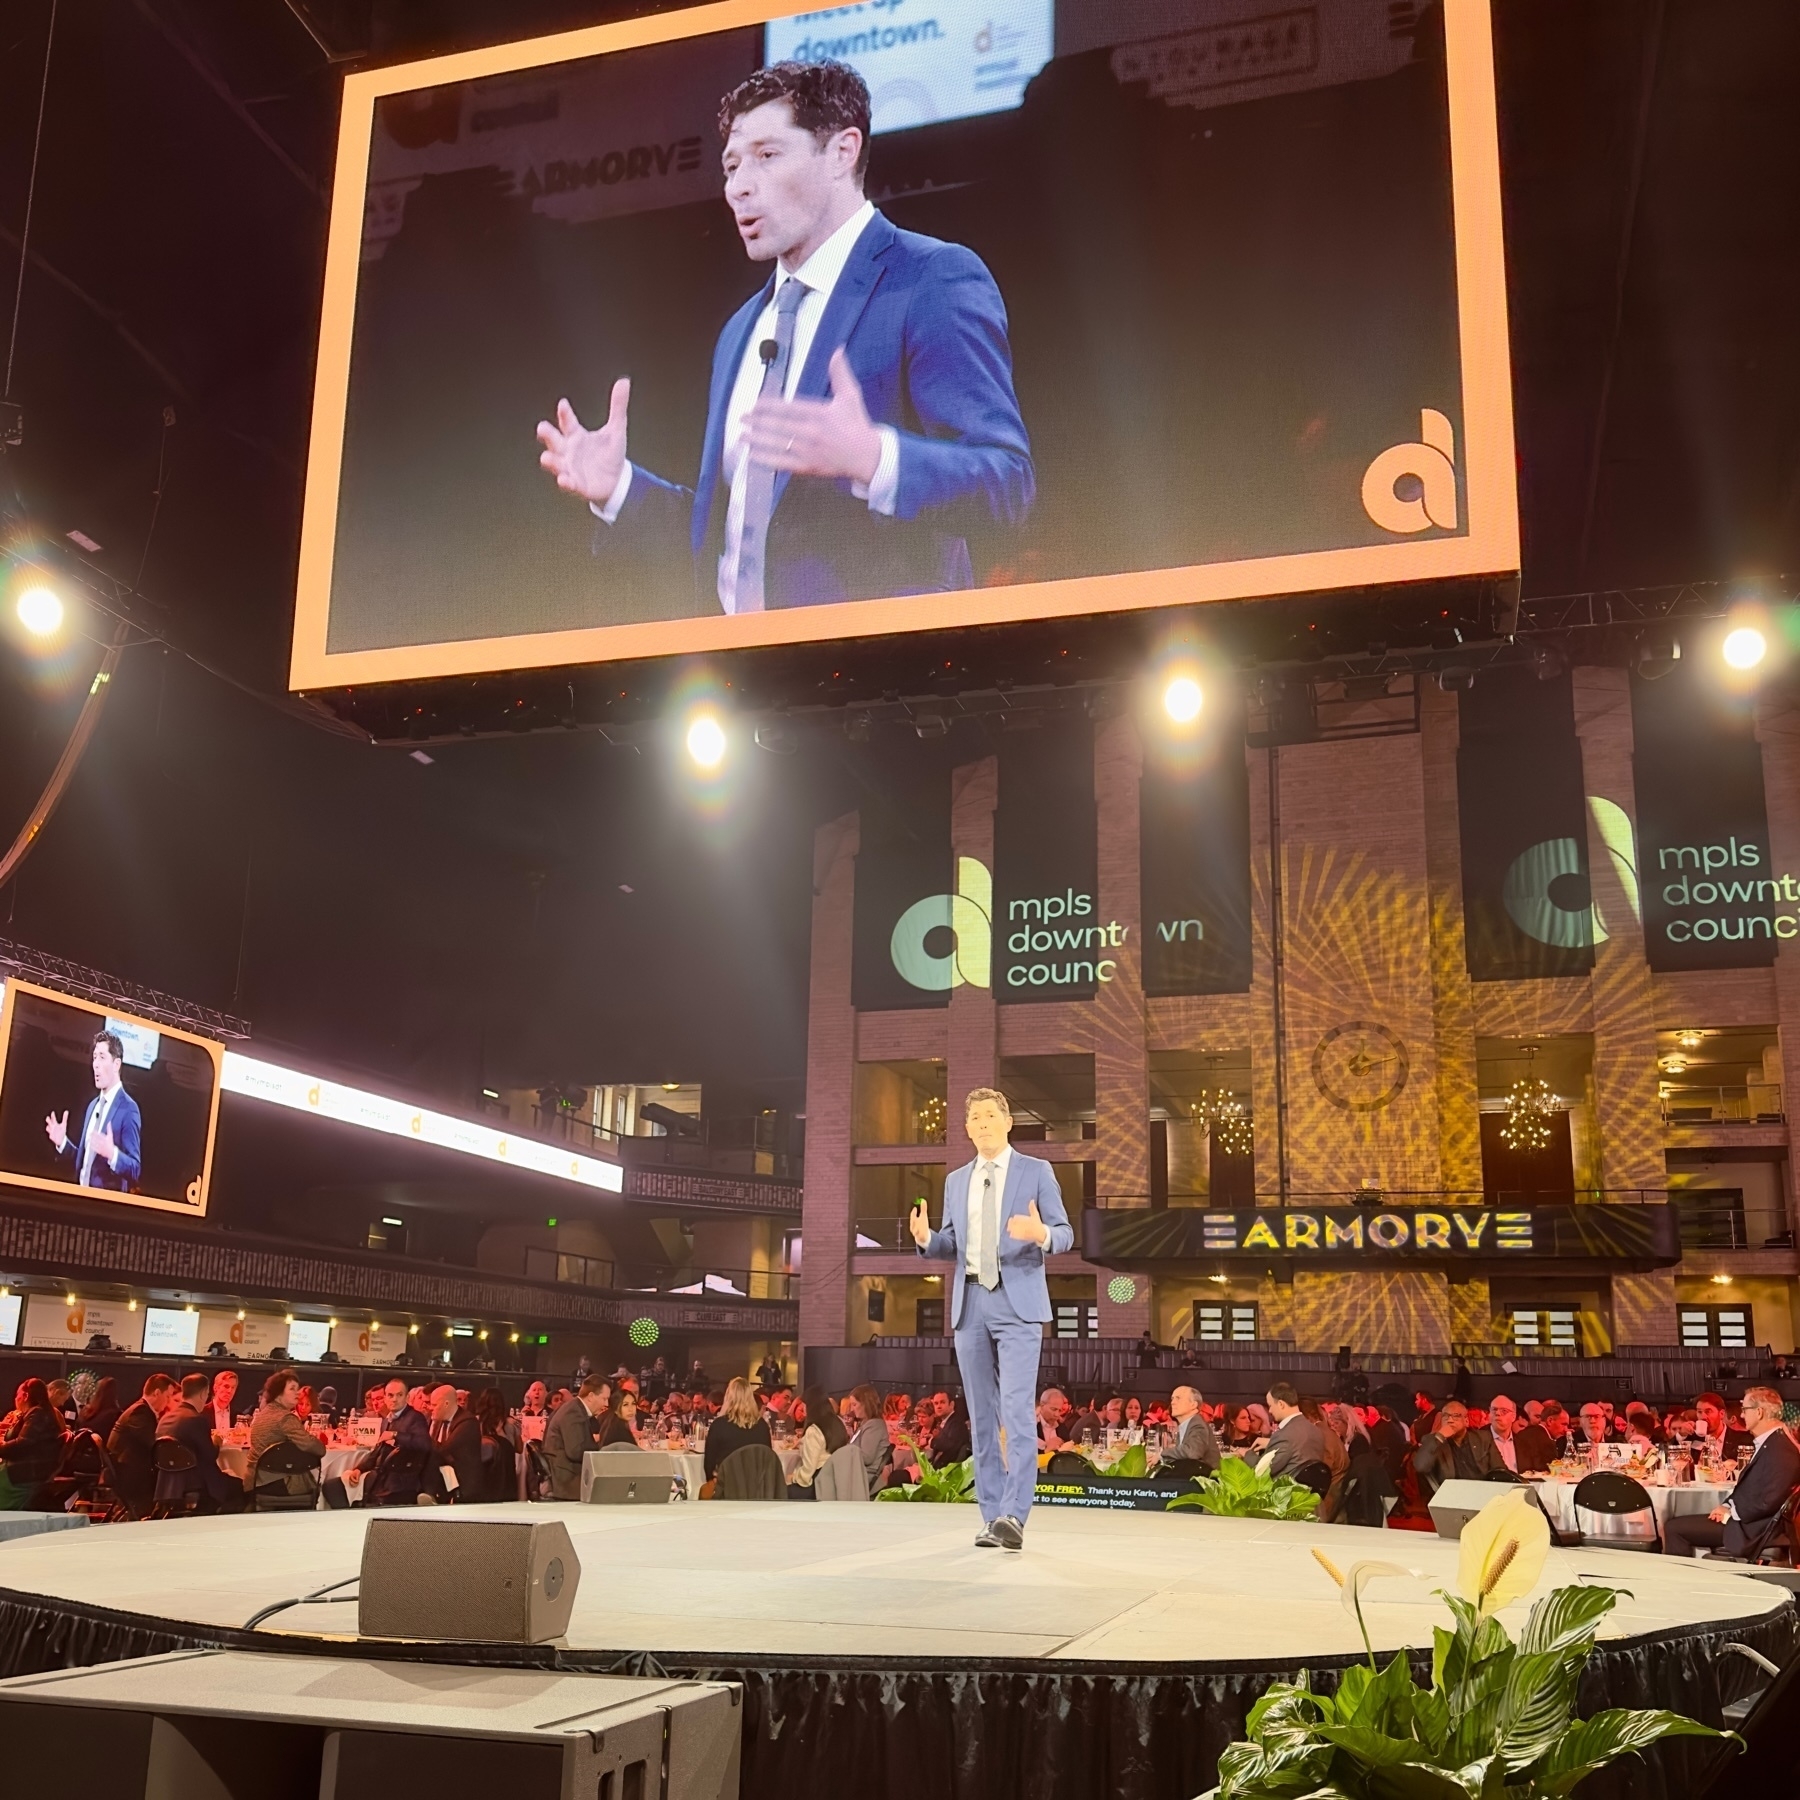 Mayor Jacob Frey on stage at an event, with their image displayed on a large screen behind them. The audience is seated at tables in a large venue, with banners reading “mpls downtown council” and “ARMORY” visible in the background.